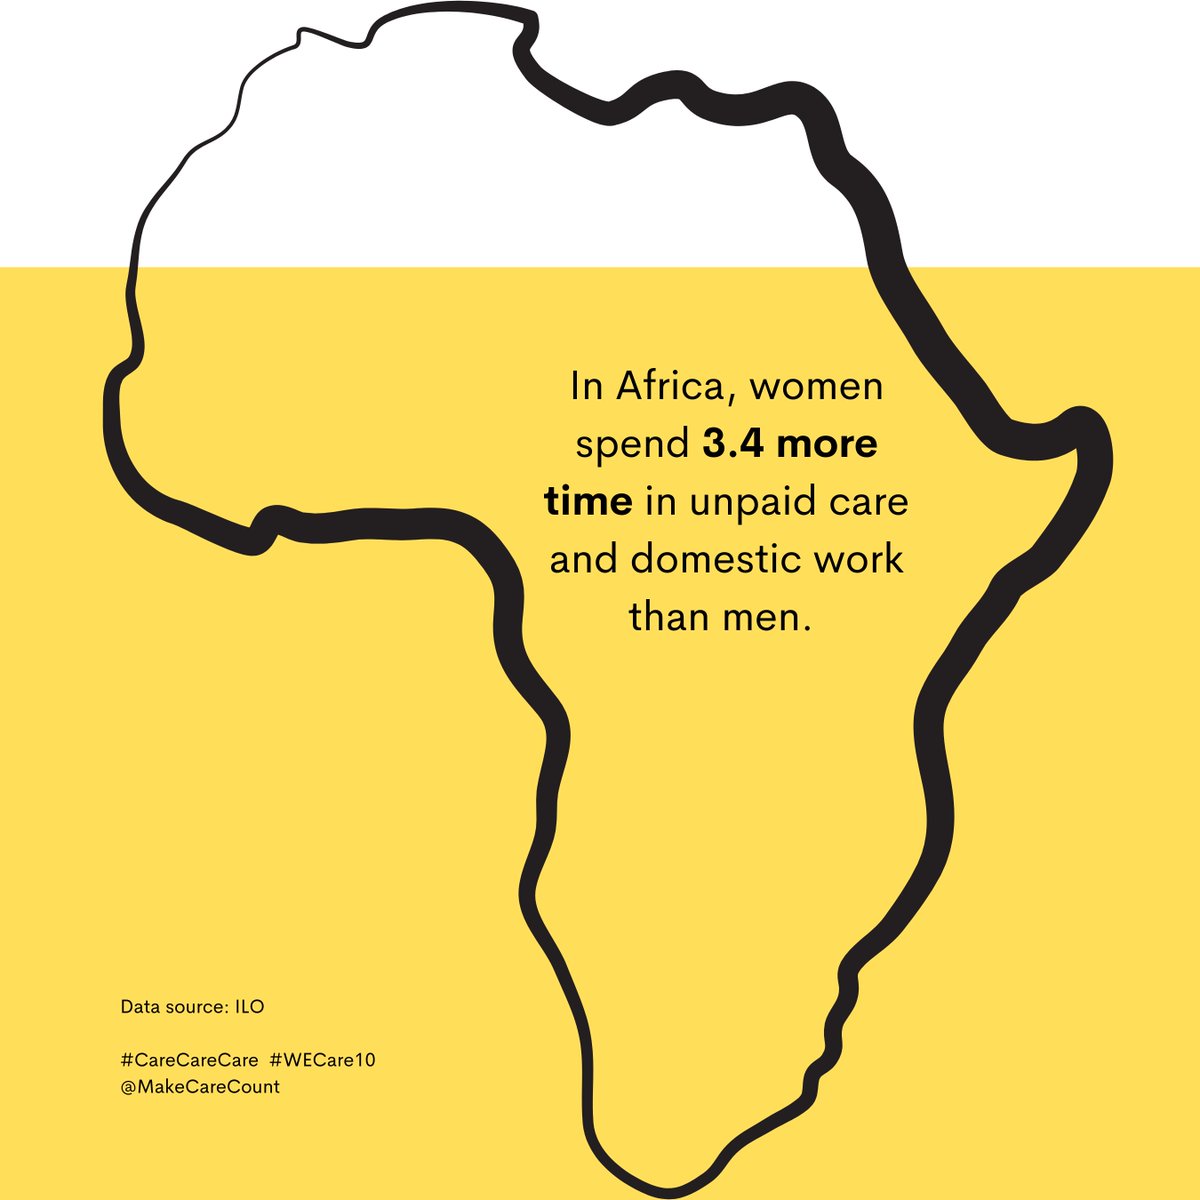 Across #Africa, women and girls are providing millions of hours of unpaid care and domestic work—a provision which props up the economy and underpins society, yet remains under-recognized, undervalued, and under-invested in. It's time we change this. ⌛️ #CareCareCare #WECare10